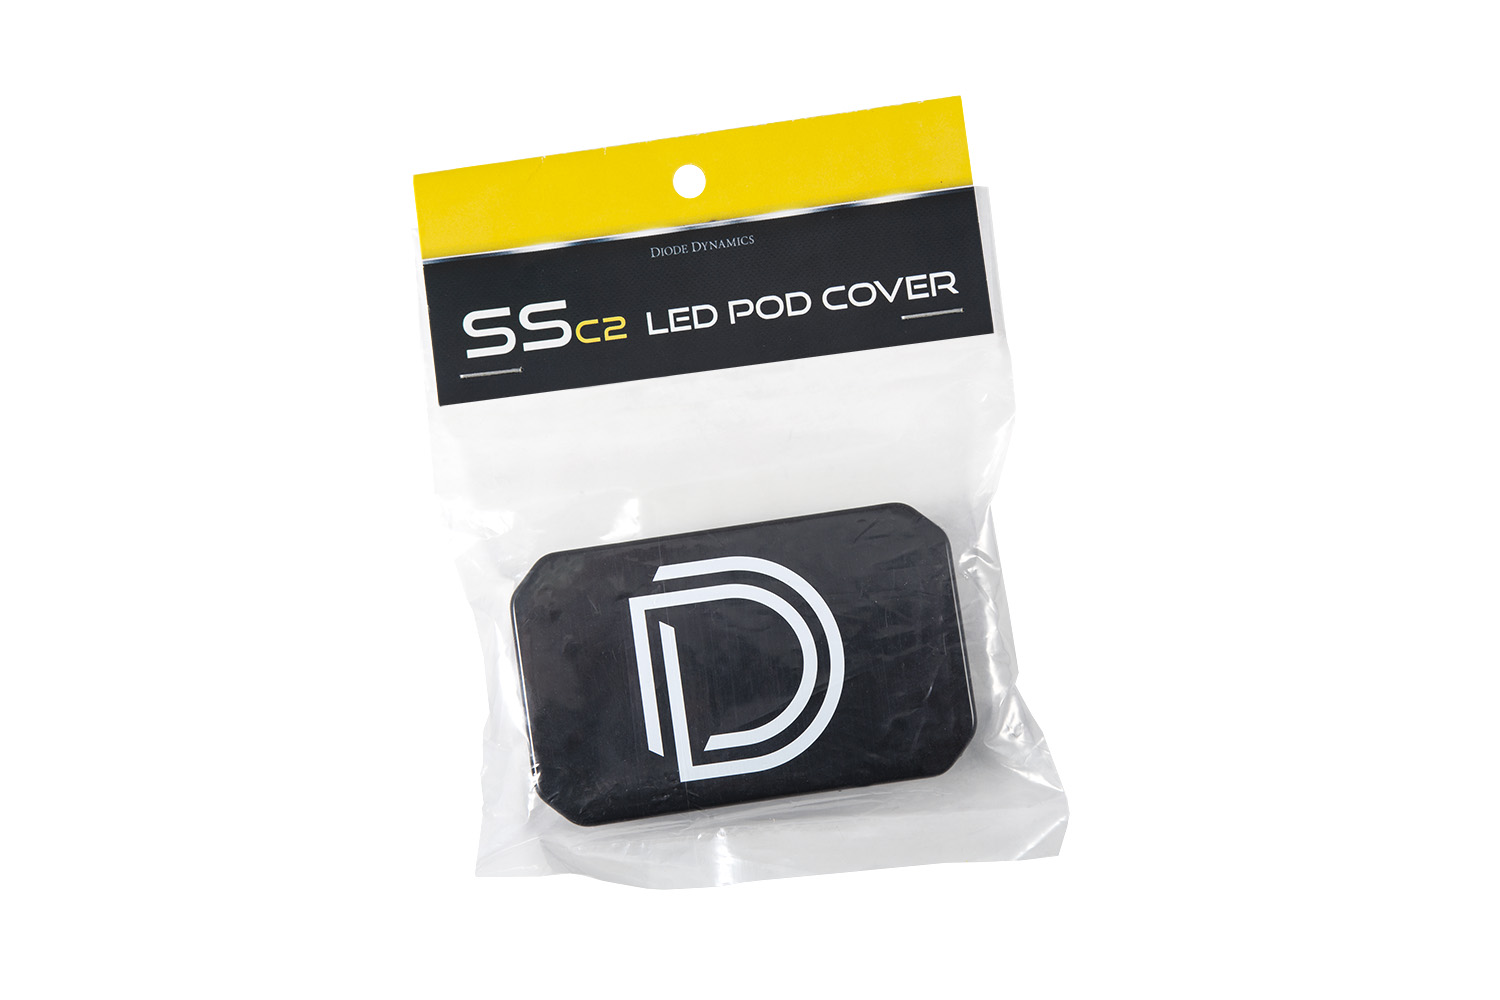 Picture of Diode Dynamics DD6599 Snap-On Cover For Your Stage Series 2" Led Pod Light.